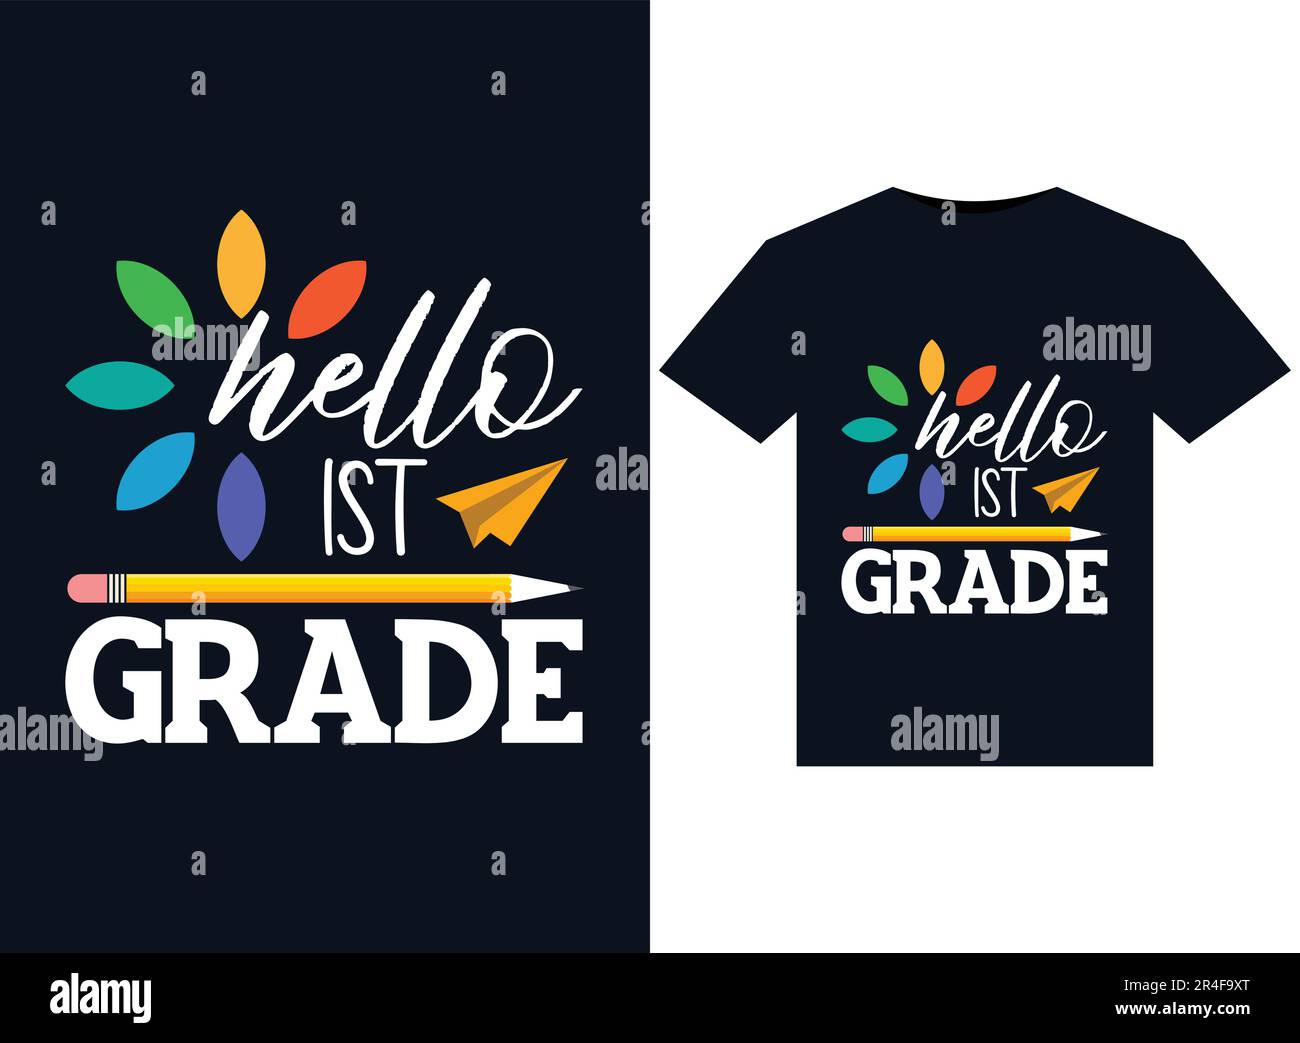 hello 1st Grade illustrations for print-ready T-Shirts design Stock Vector